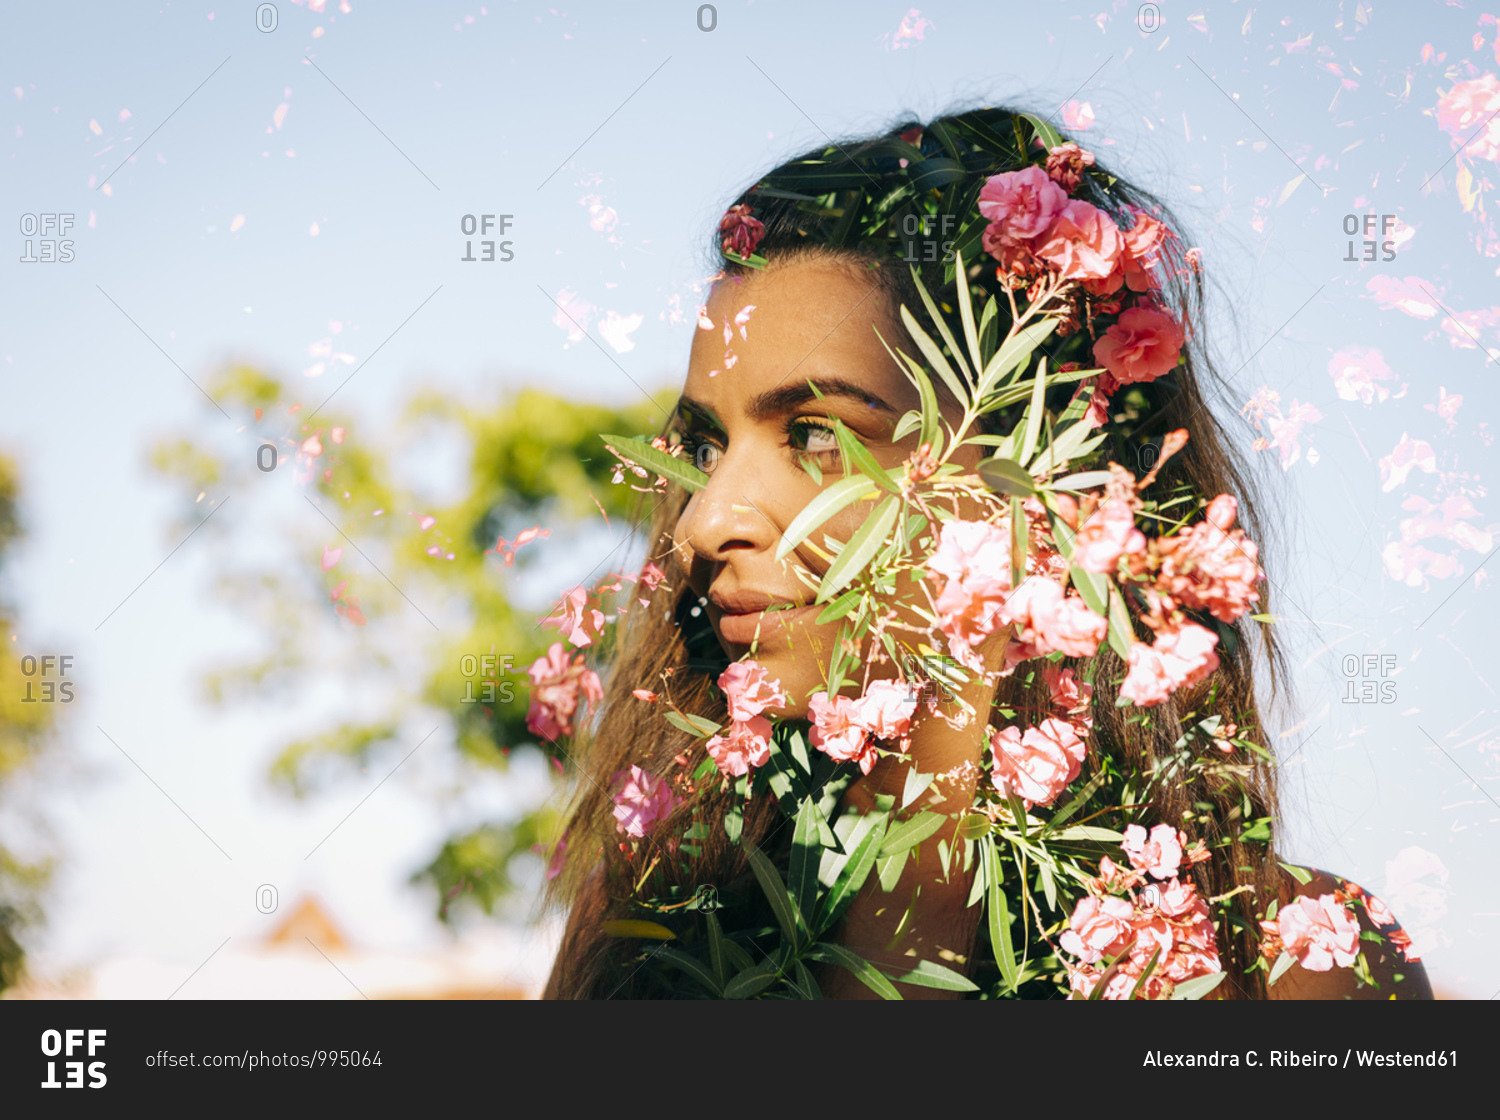 Double exposure of thoughtful young woman and flowers against clear sky